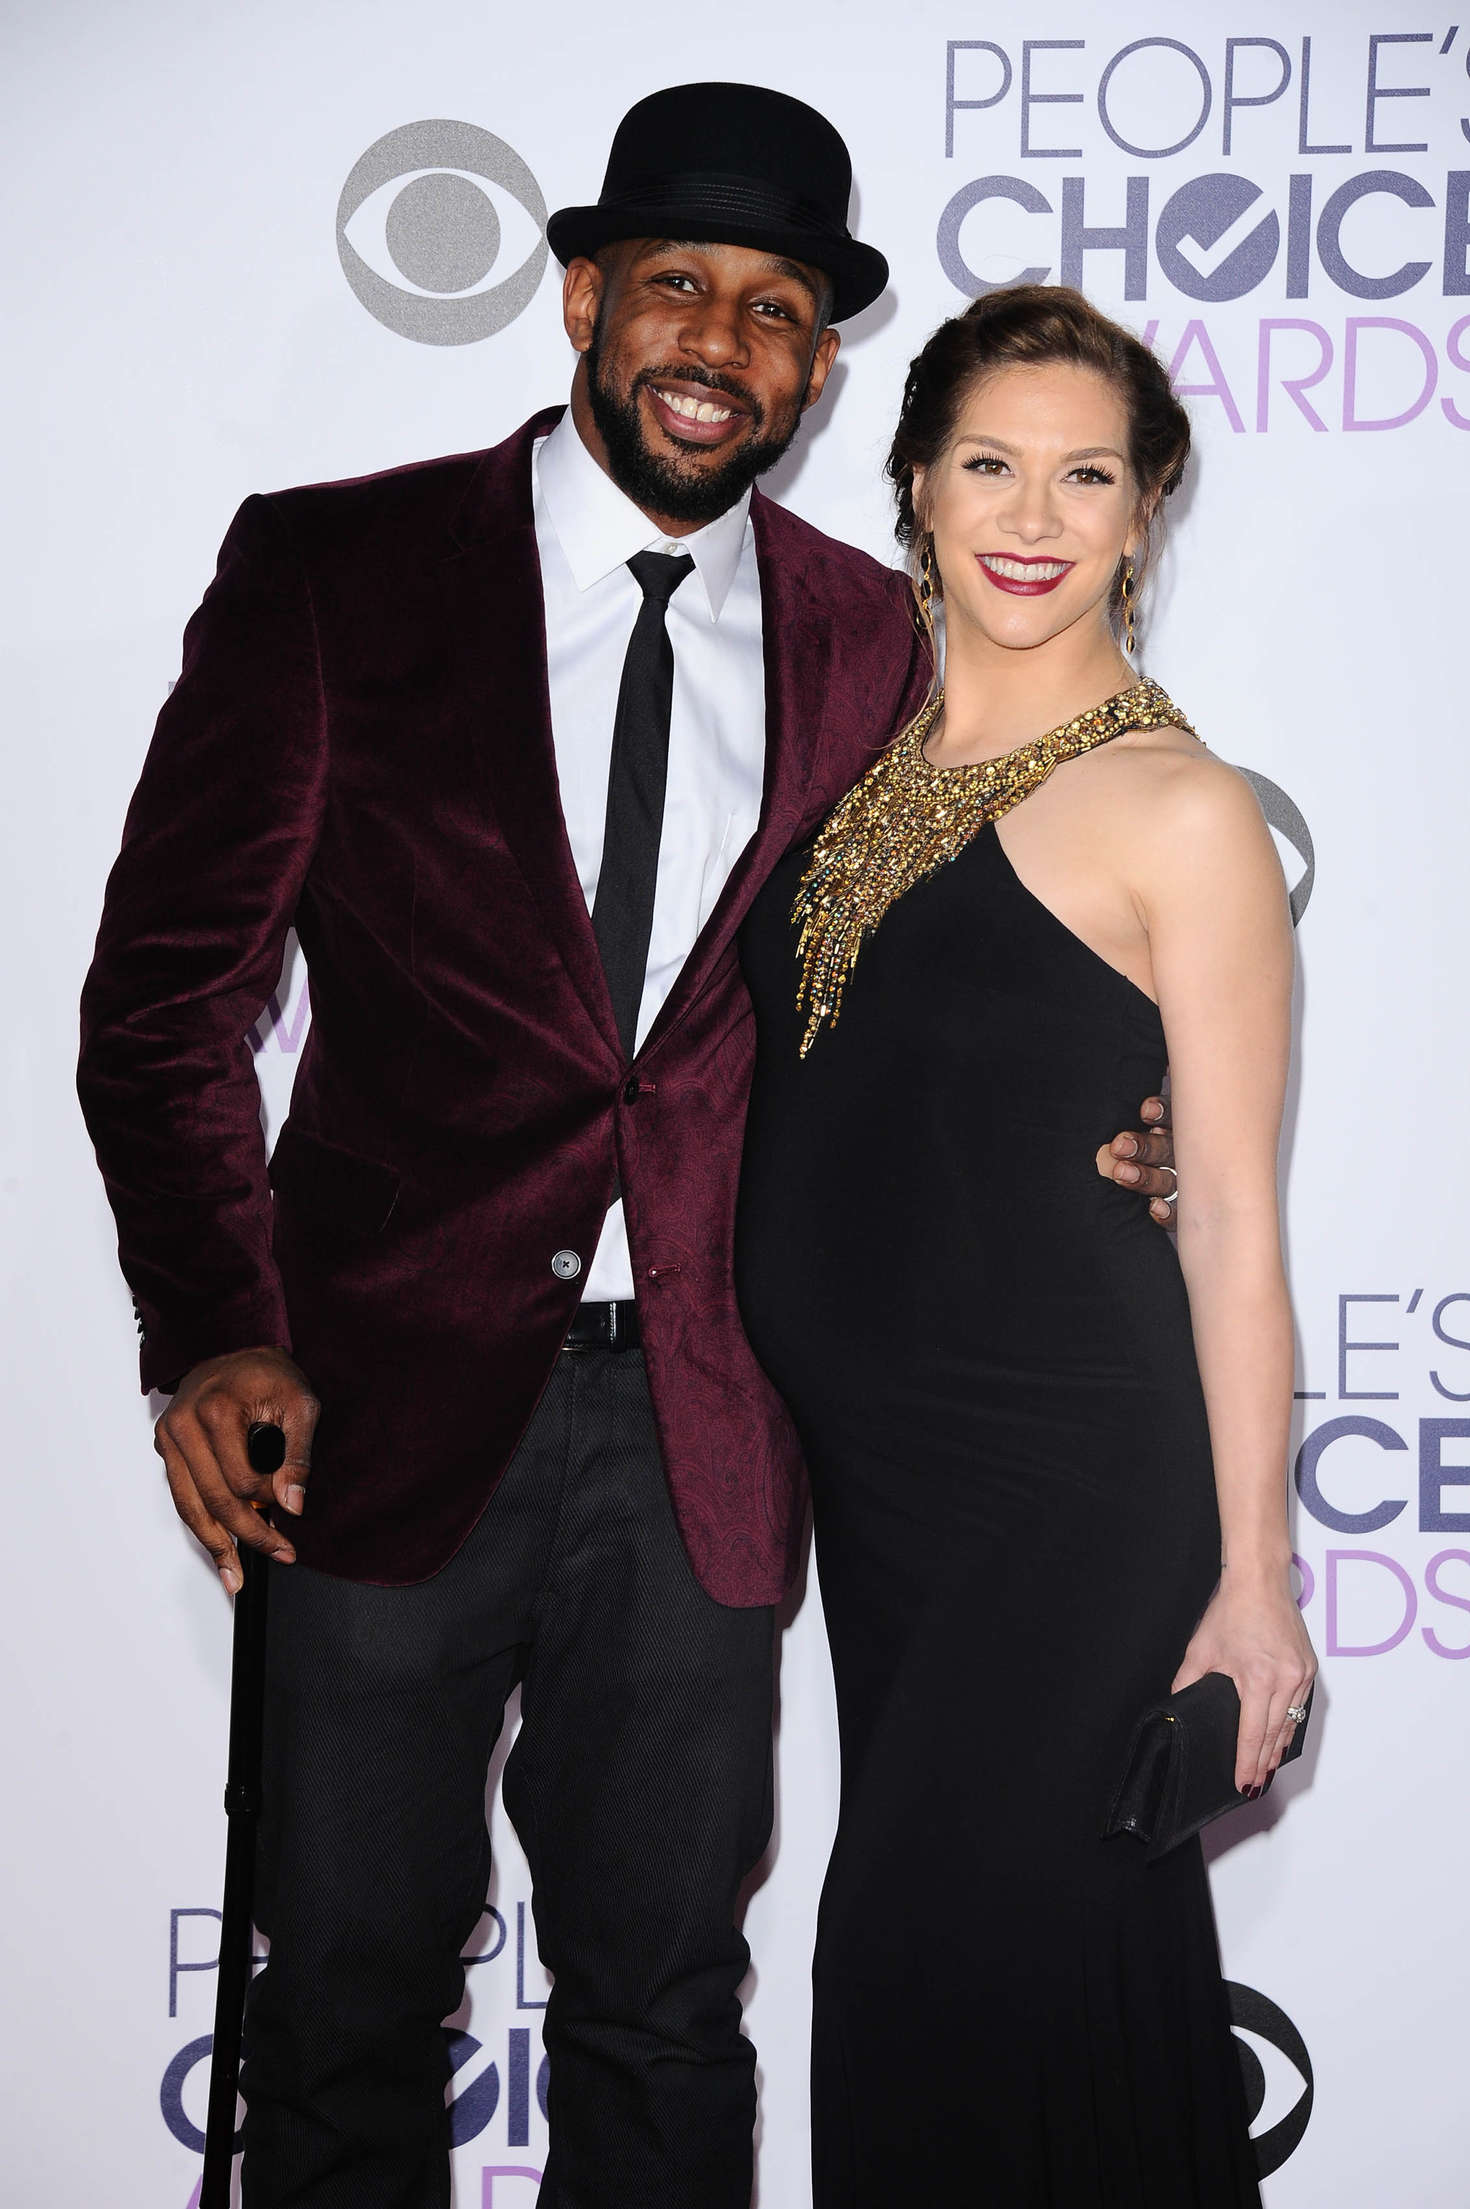 Allison Holker Peoples Choice Awards in Los Angeles